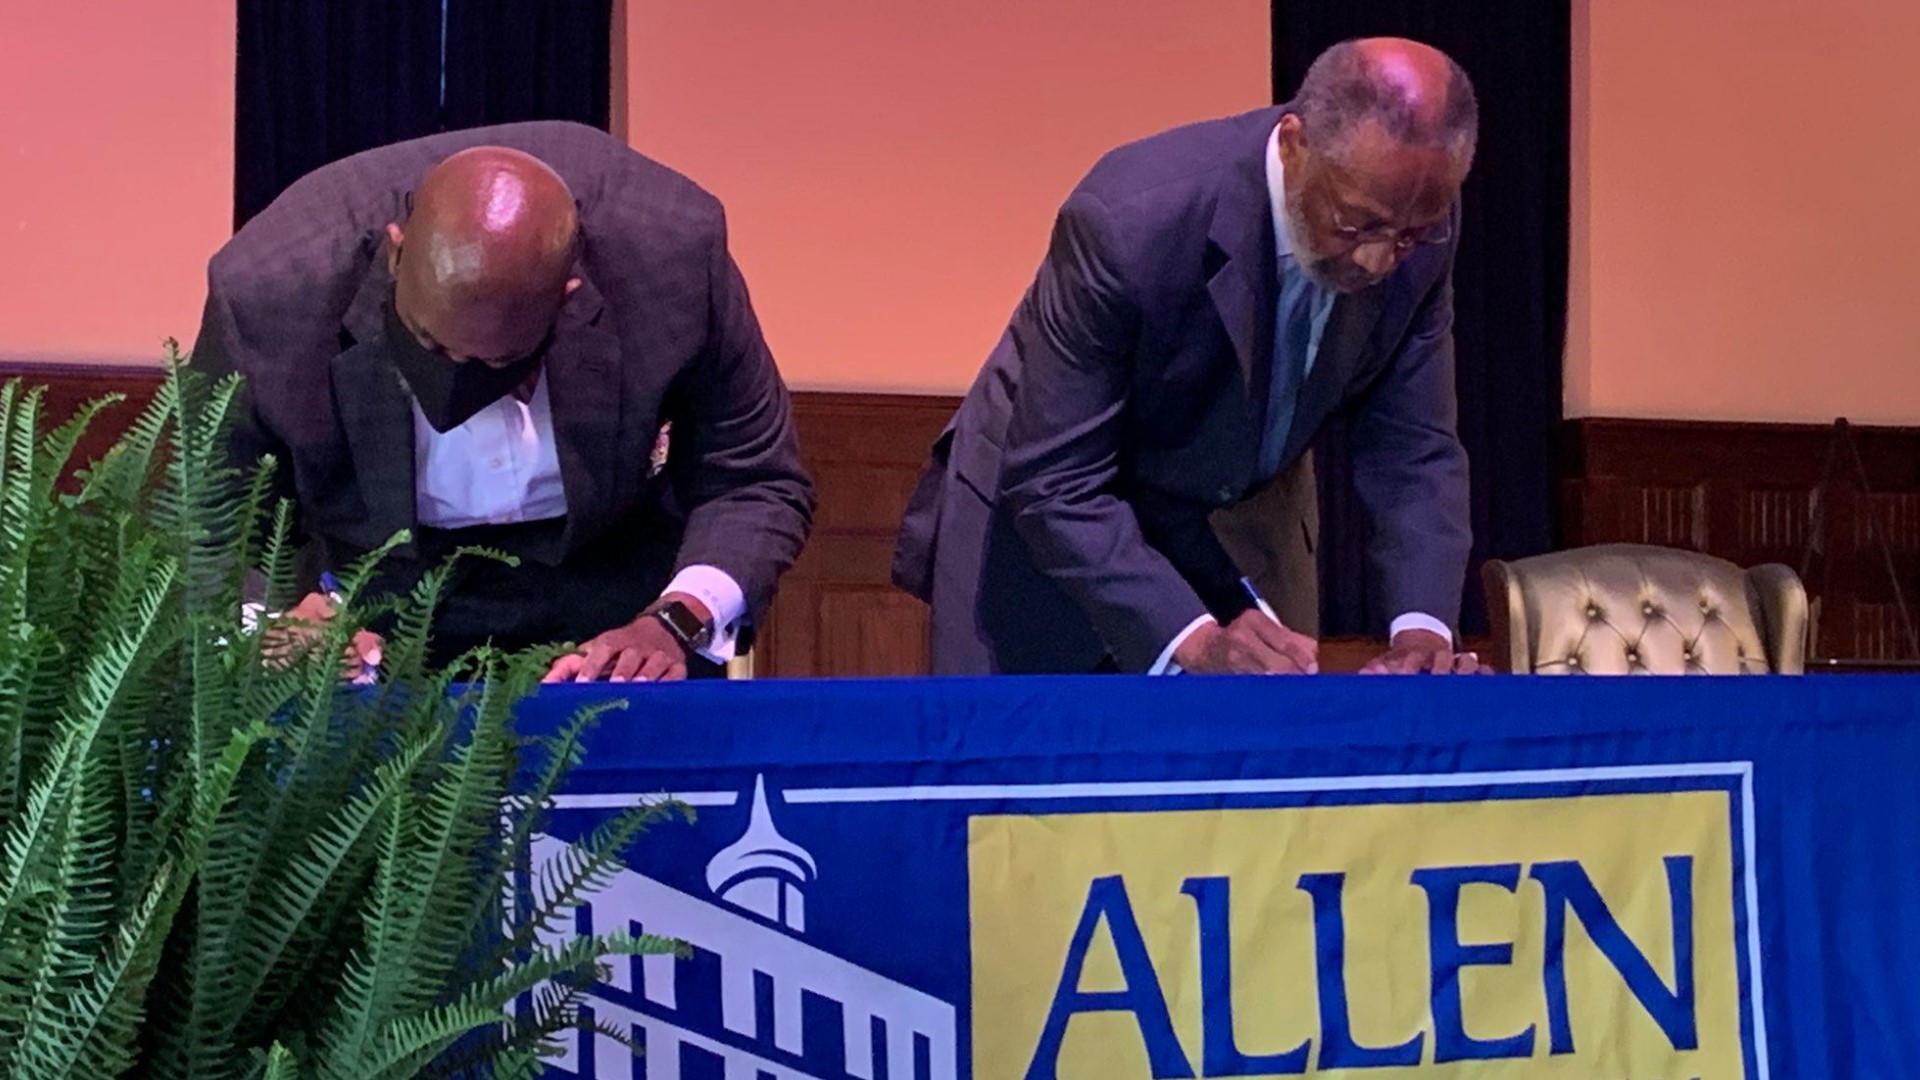 Allen University and Richland School District Two are partnering to support student success and help retain talent in the Columbia area after college.